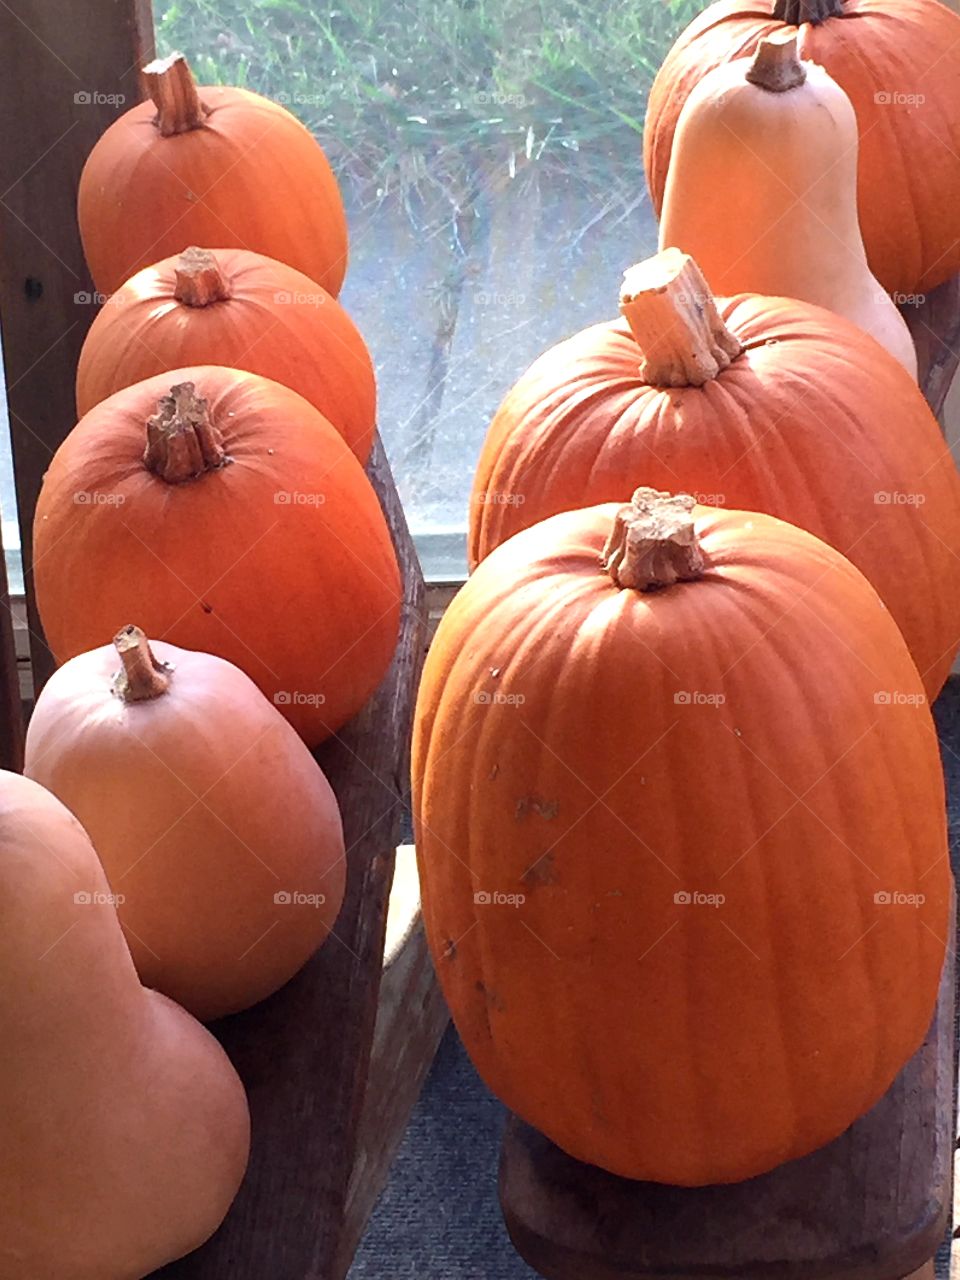 Pumpkins and squash, fresh-grown from the garden.